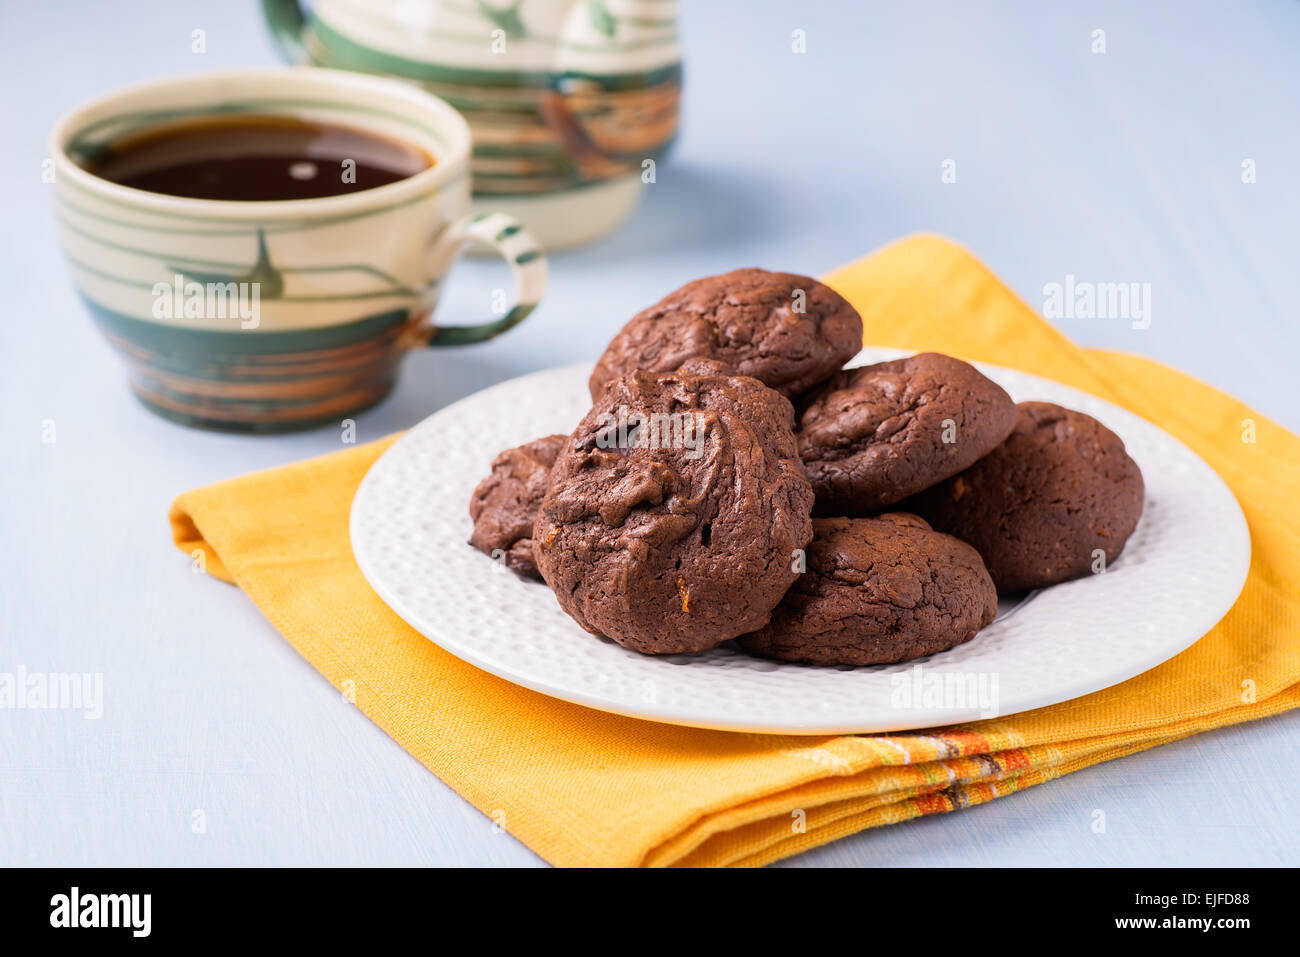 Homemade chocolate cookies on white plate, selective focus Stock Photo